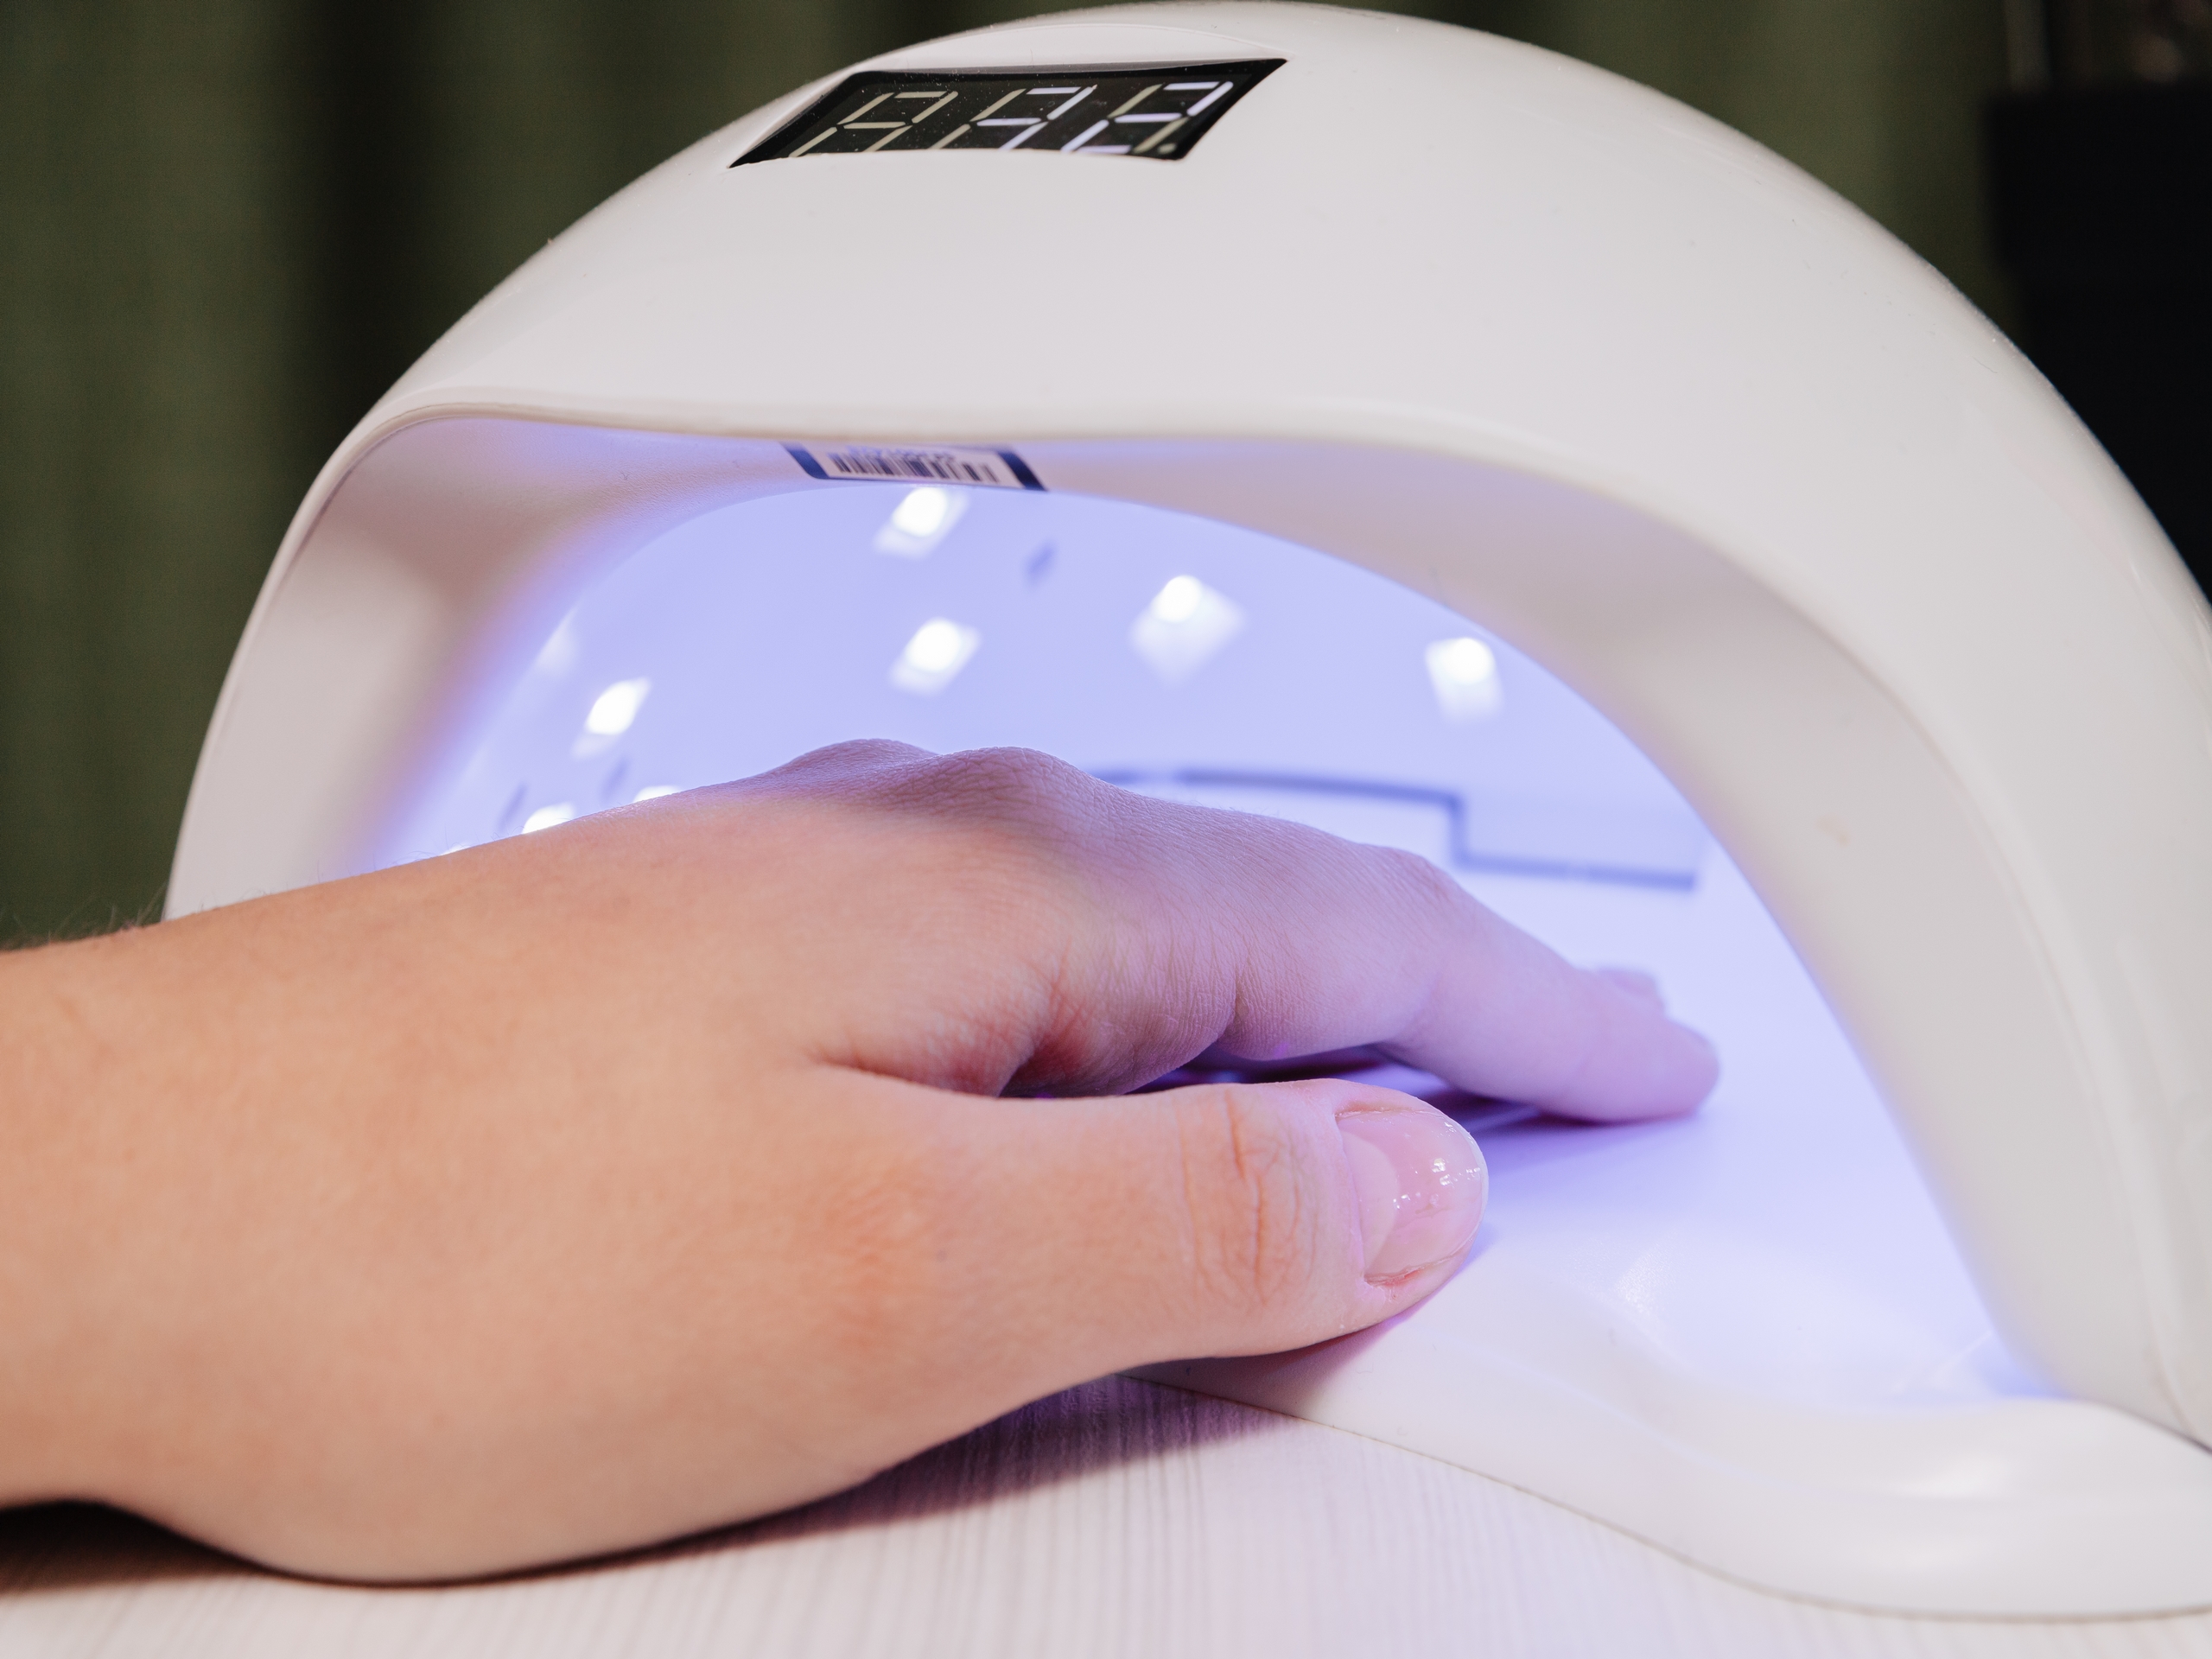 Manicure process. Drying nails in a device with ultraviolet lamps.